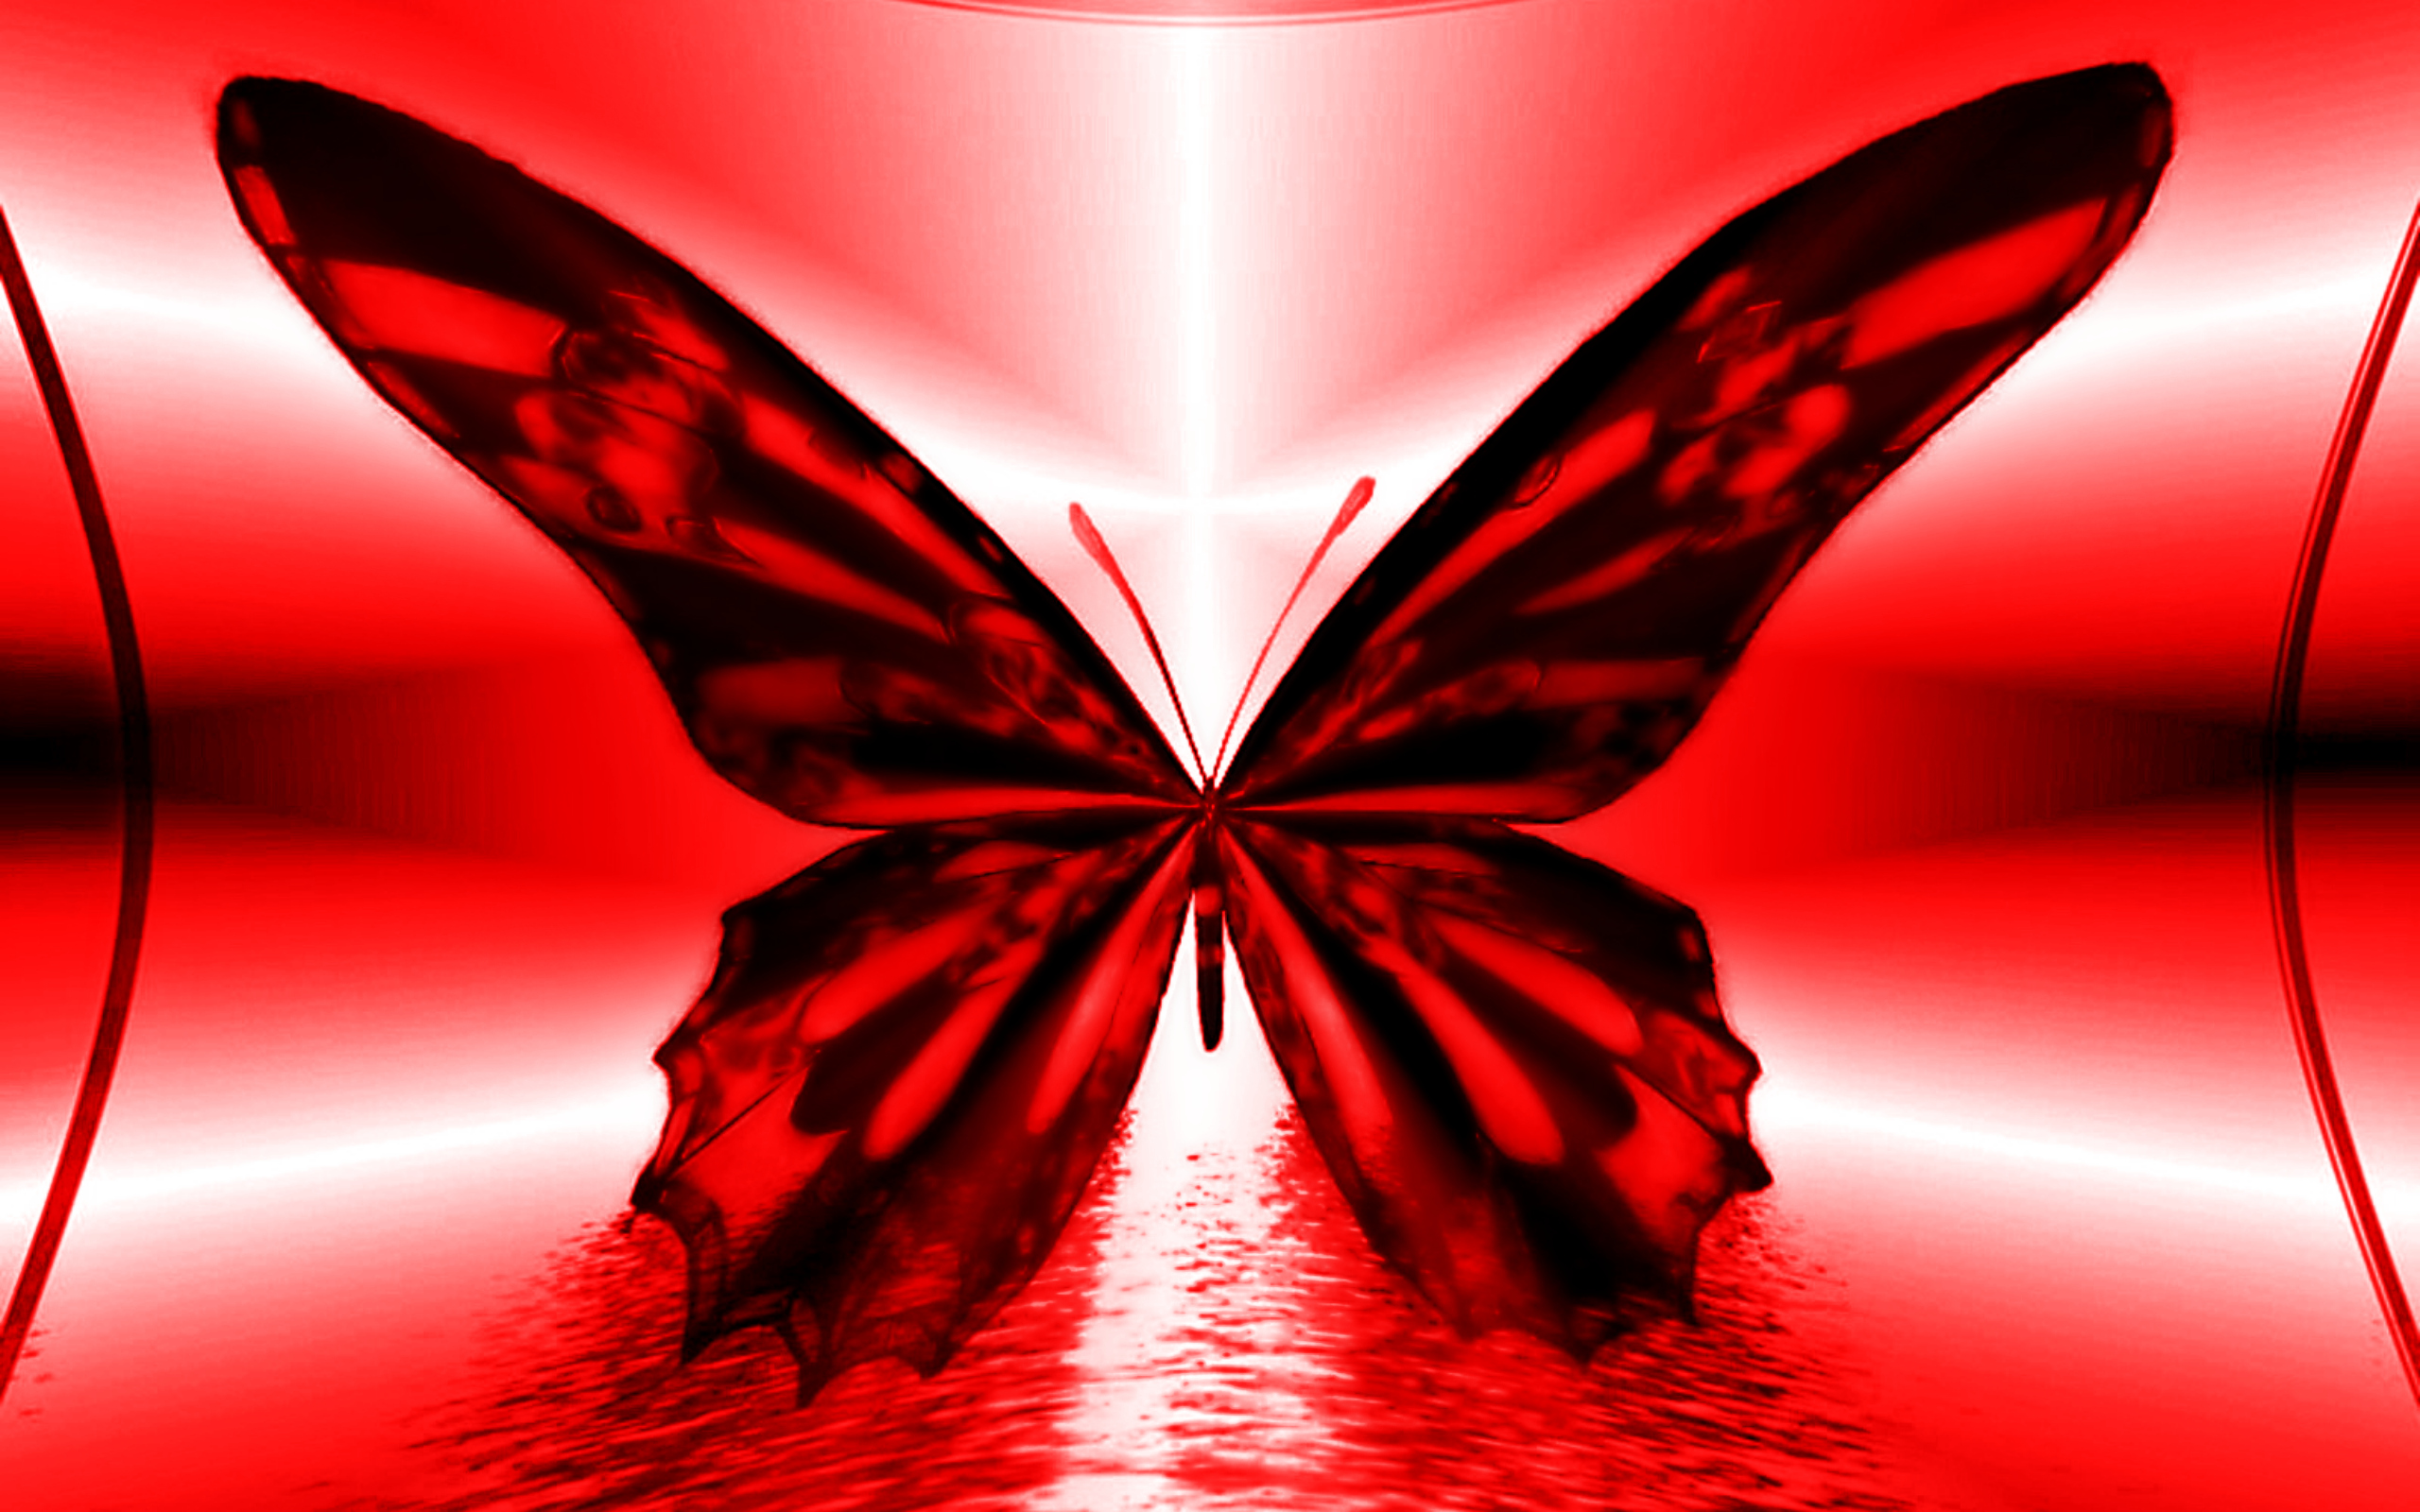 Abstract Red Butterfly Pictures In High Definition Or